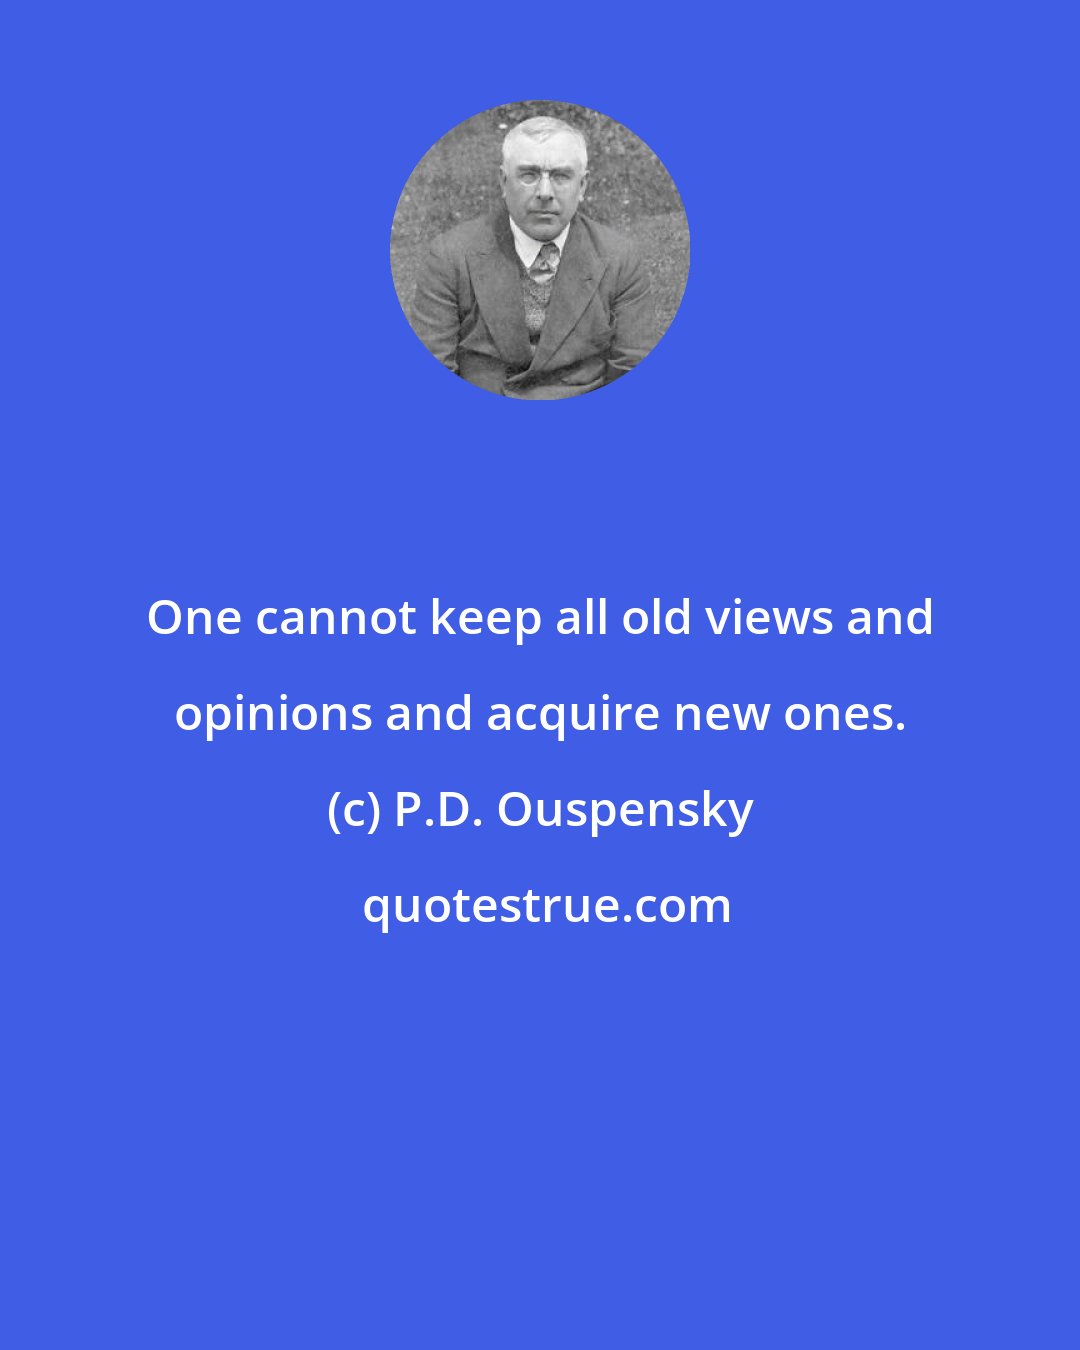 P.D. Ouspensky: One cannot keep all old views and opinions and acquire new ones.